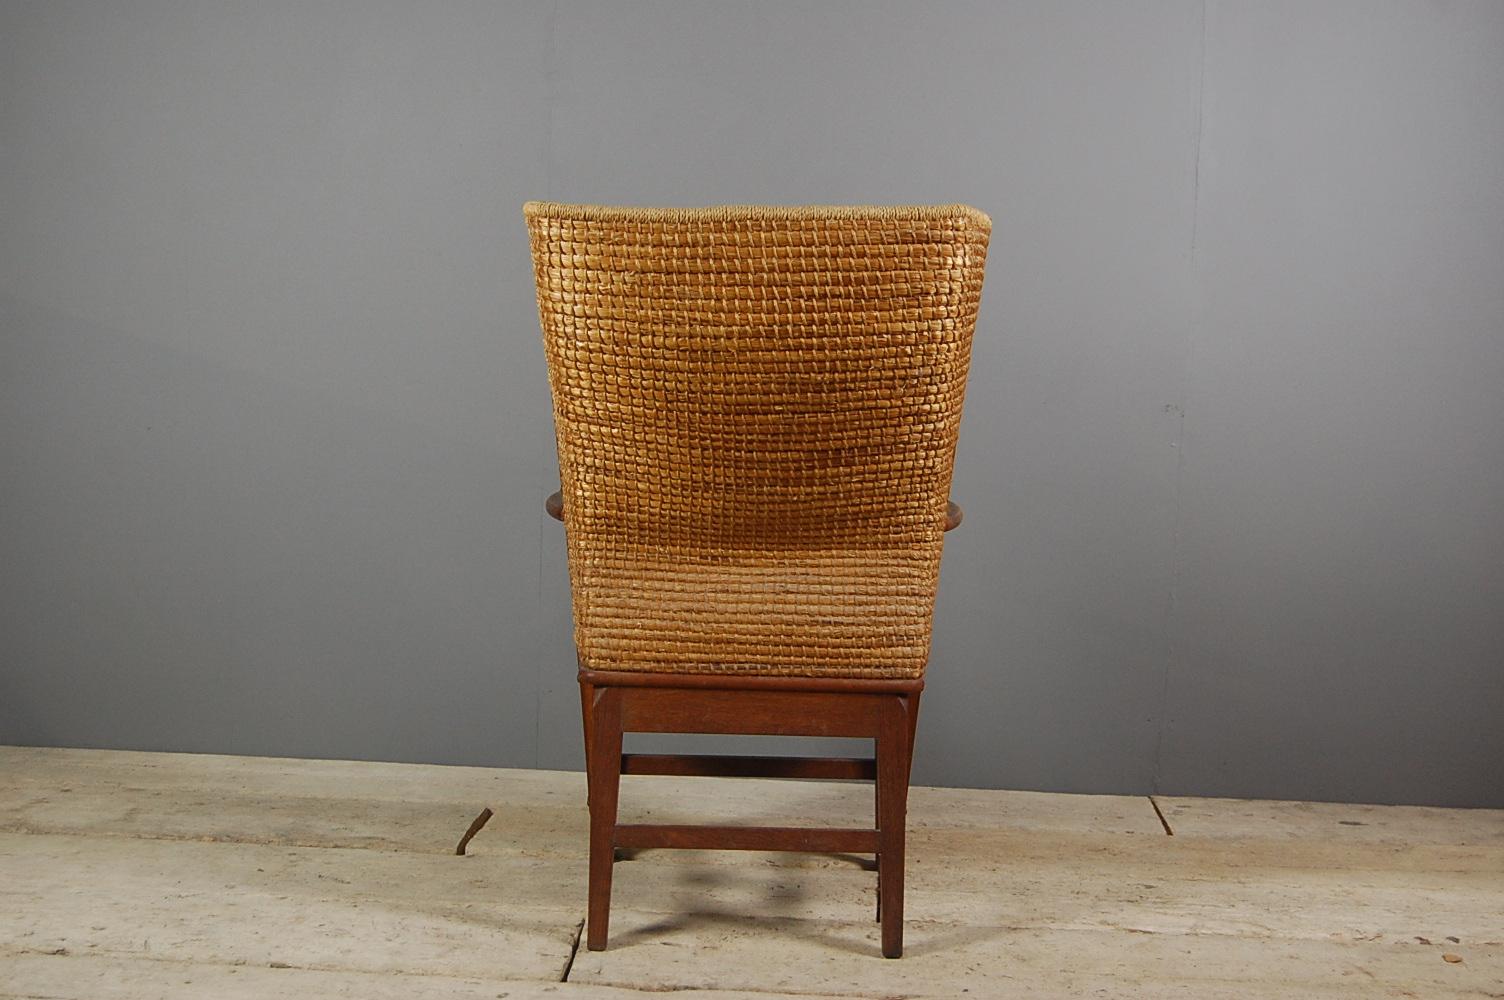 Orkney chair, a vernacular object based on the original David Kirkness design, probably made by Reynold Eunson. A similar example can be found in the Victoria and Albert Museum, London. Scotland, circa 1930.